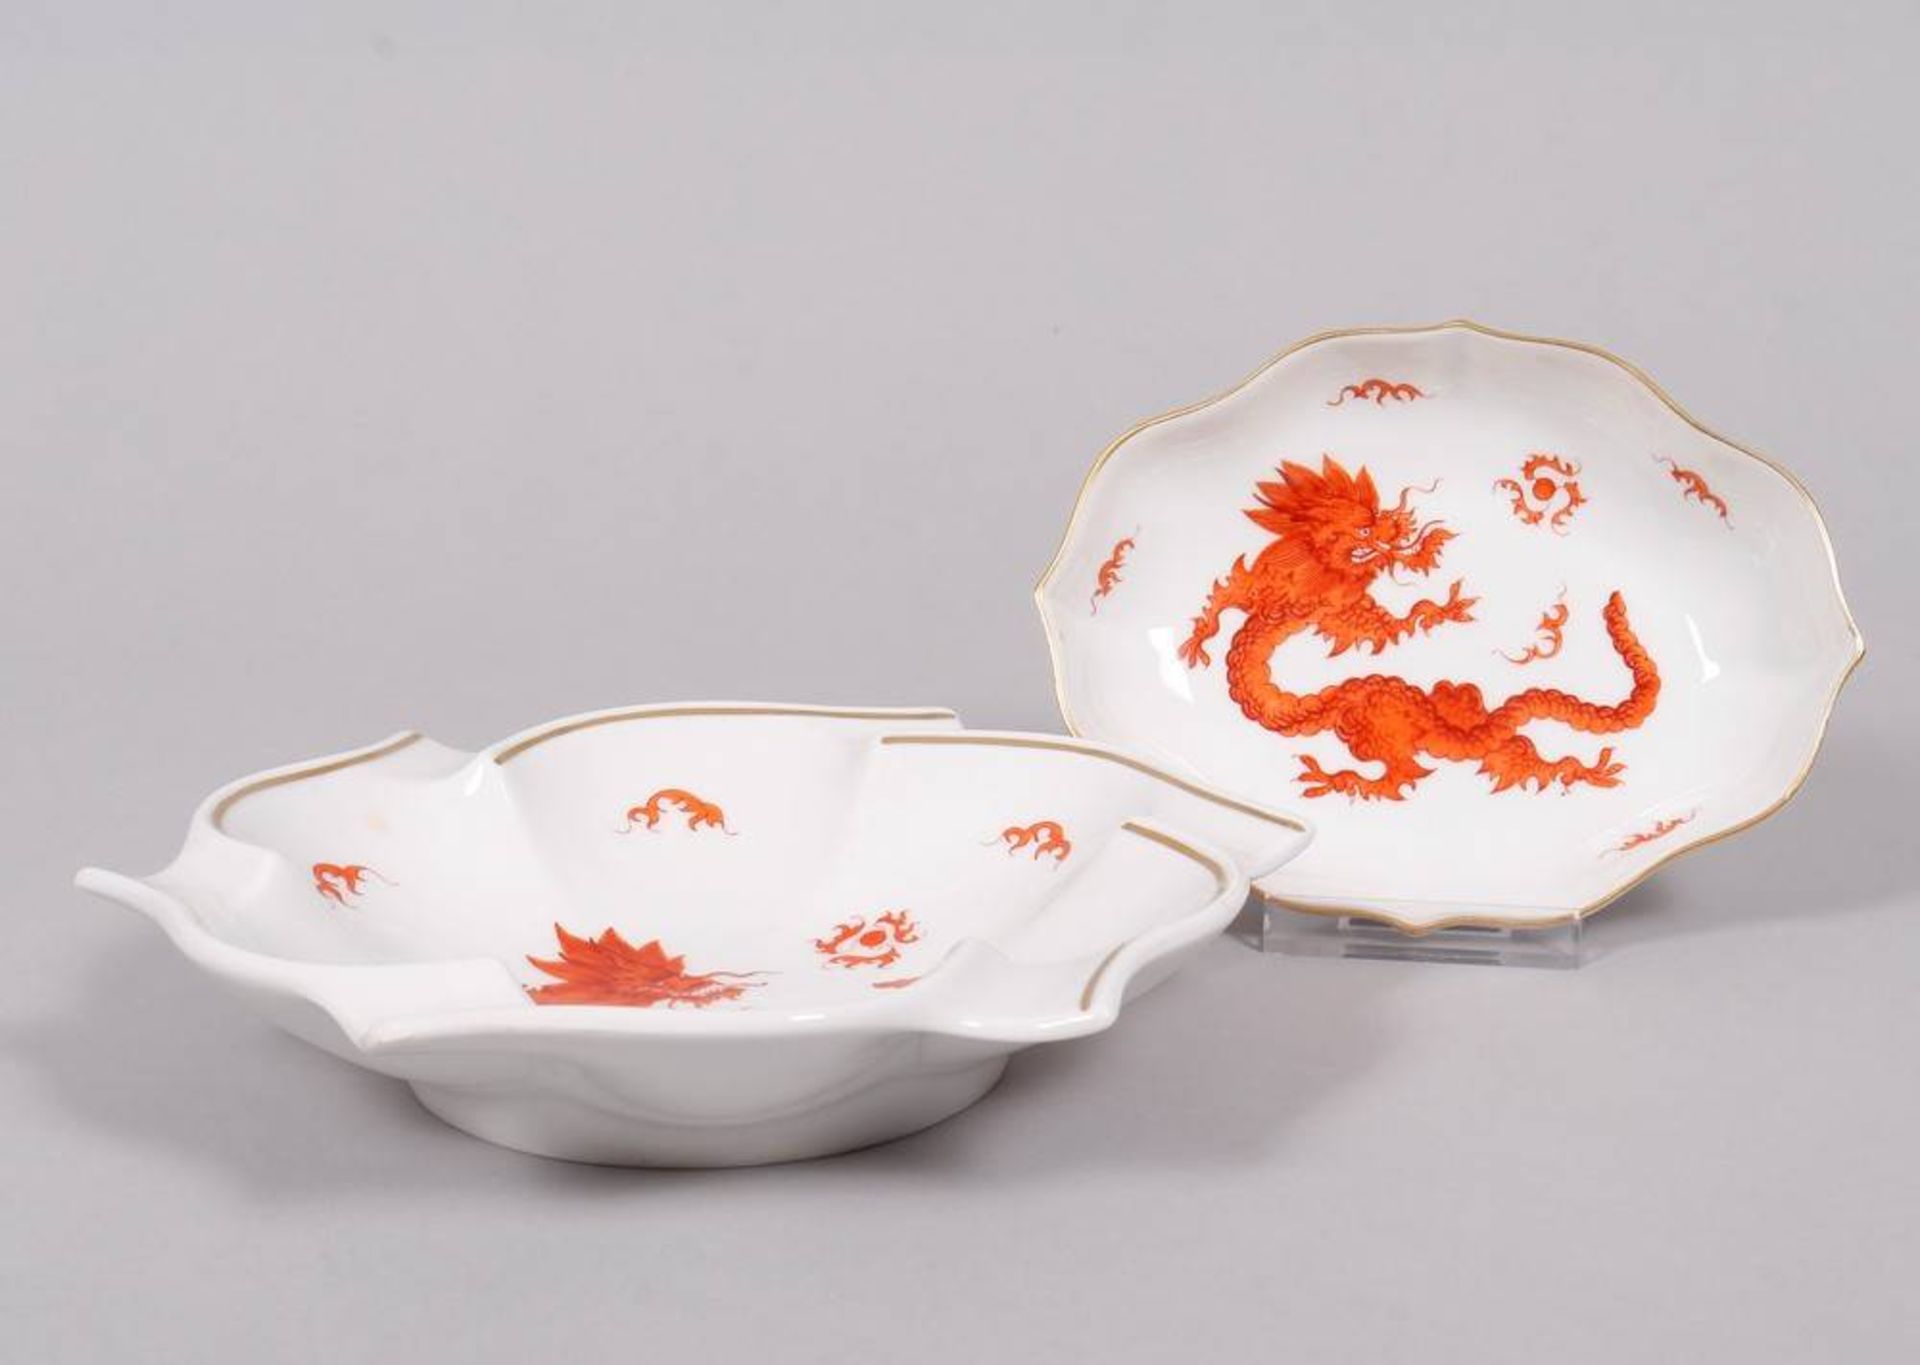 2 dishes, Meissen, mid-20th C., "Roter Drache" decor